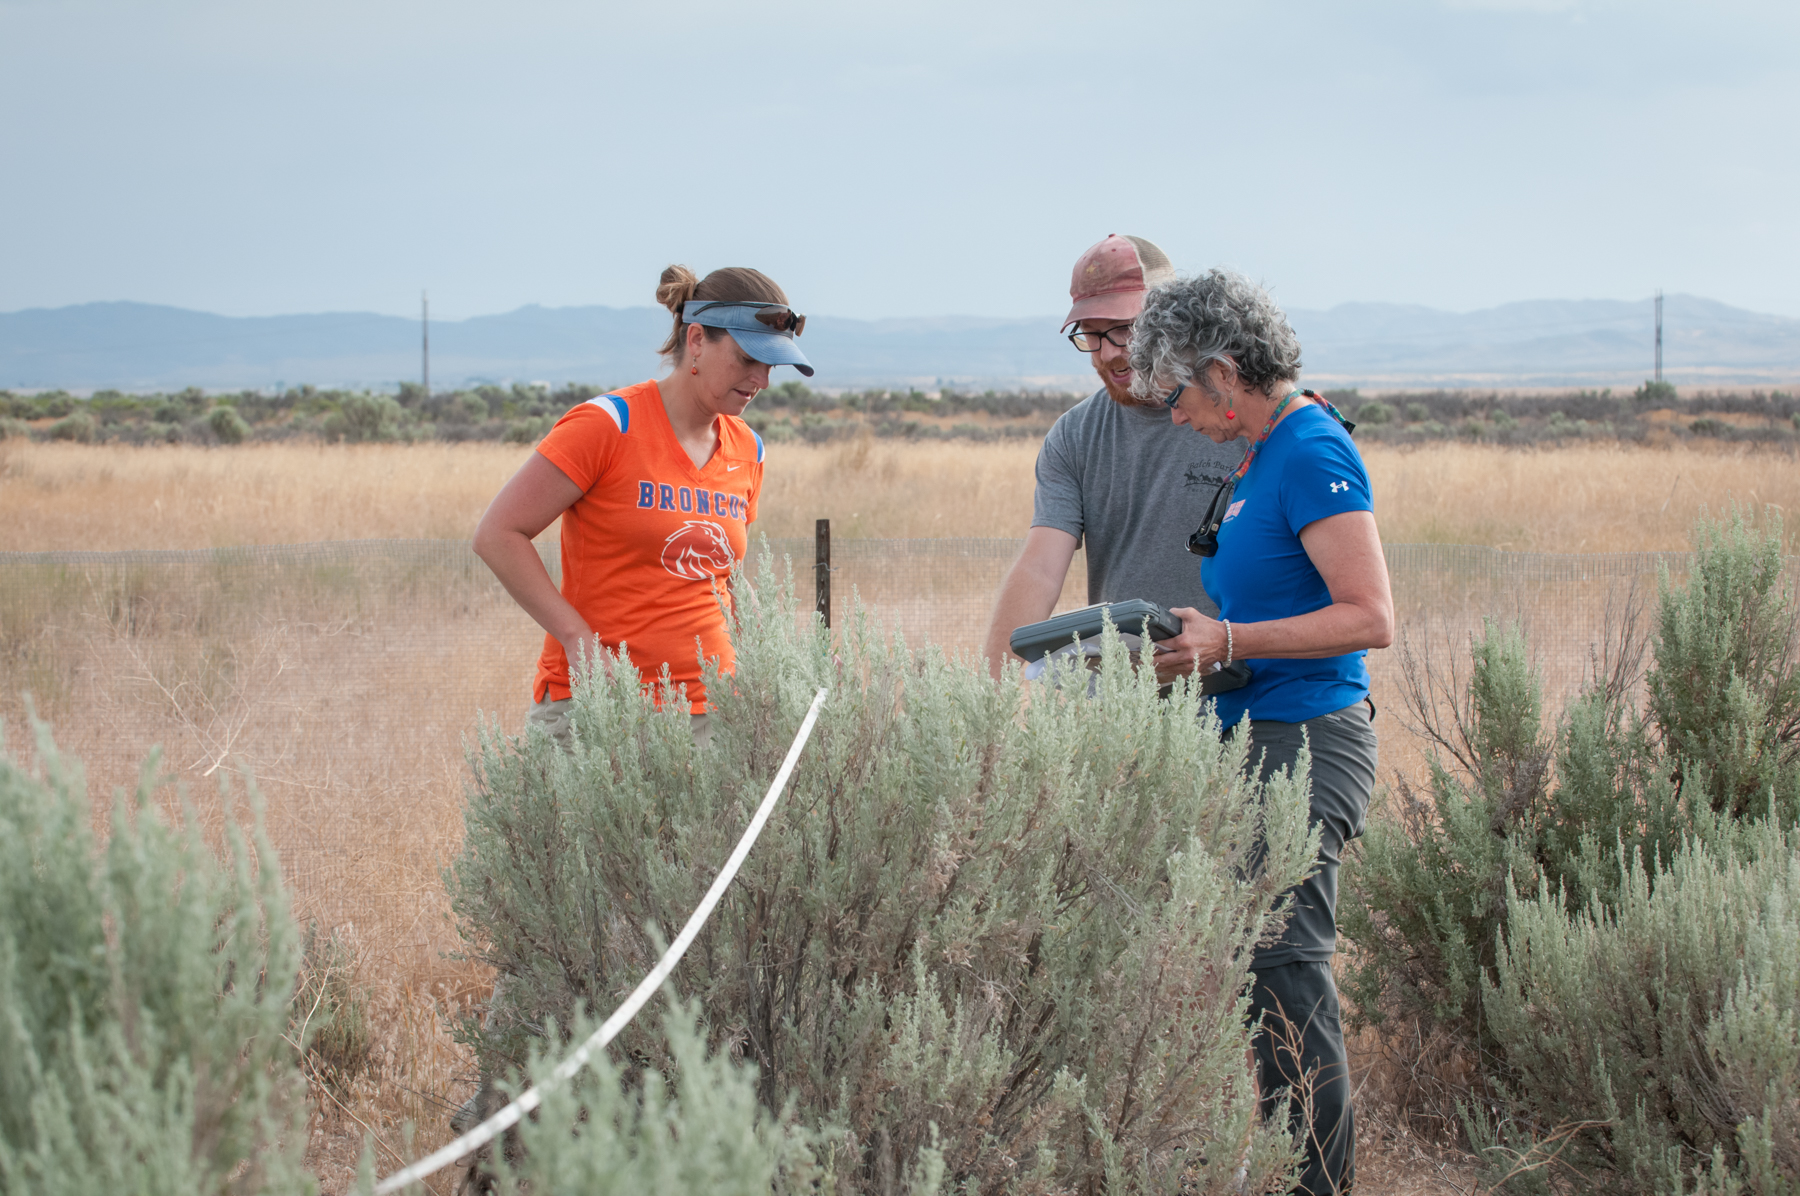 Dr. Jennifer Forbey with other researchers doing field work in a grassy area beside plants resembling sagebrush.